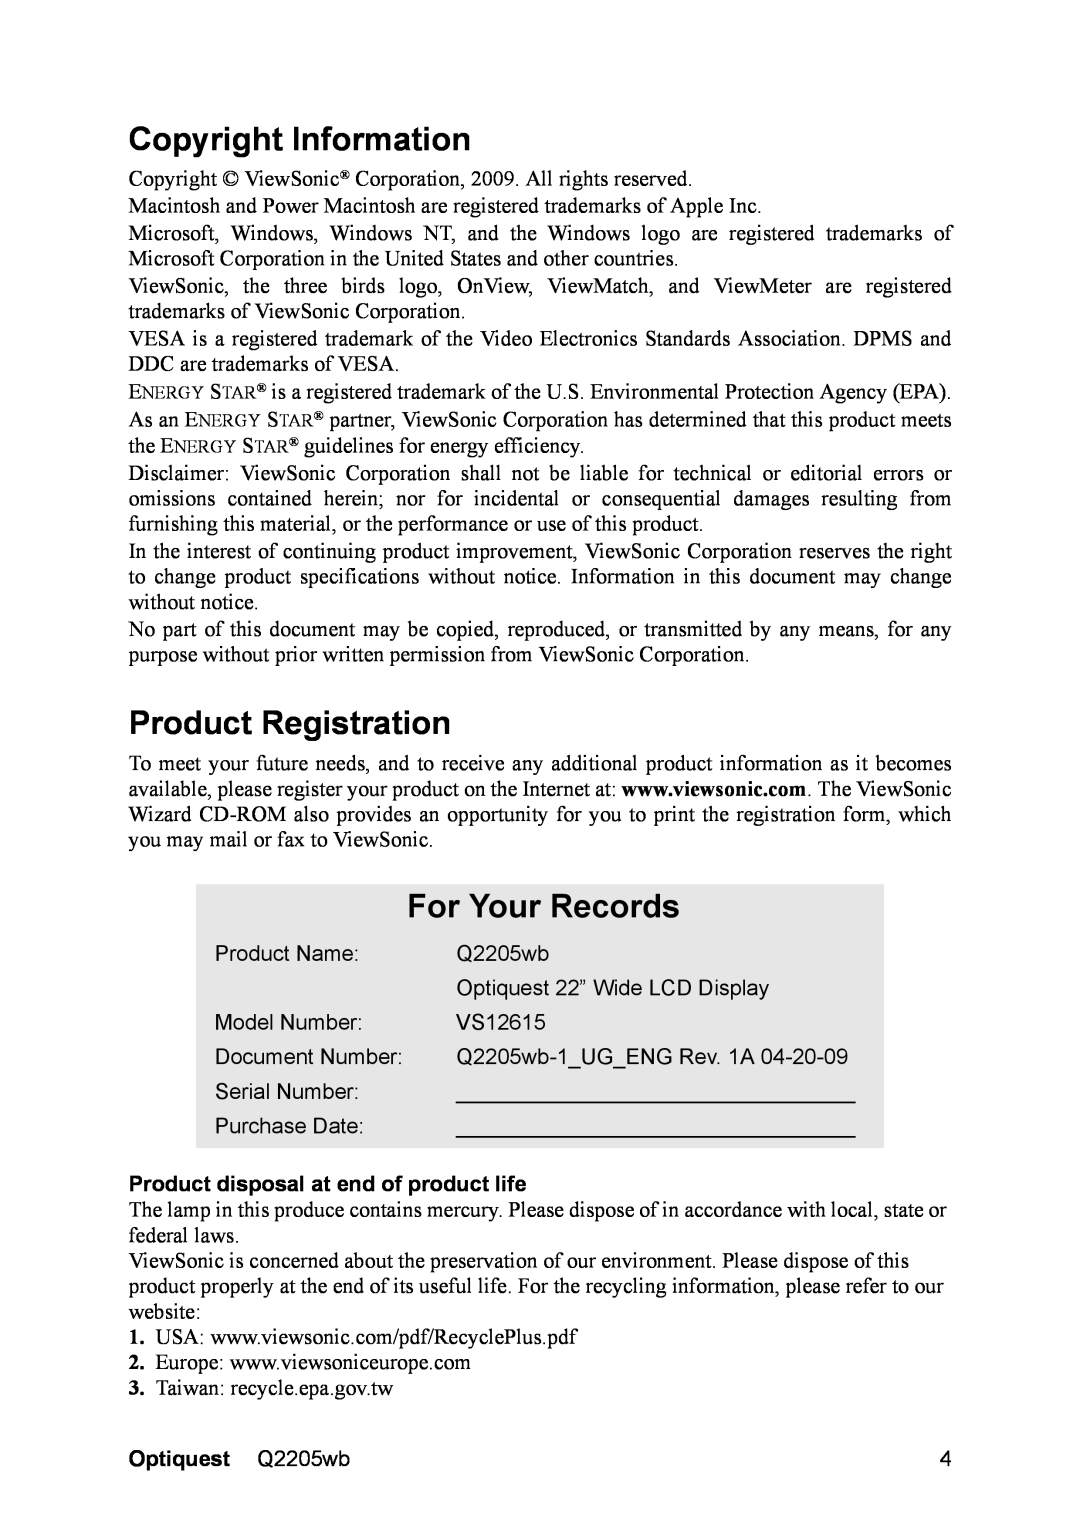 ViewSonic Q2205WB Copyright Information, Product Registration, For Your Records, Product disposal at end of product life 